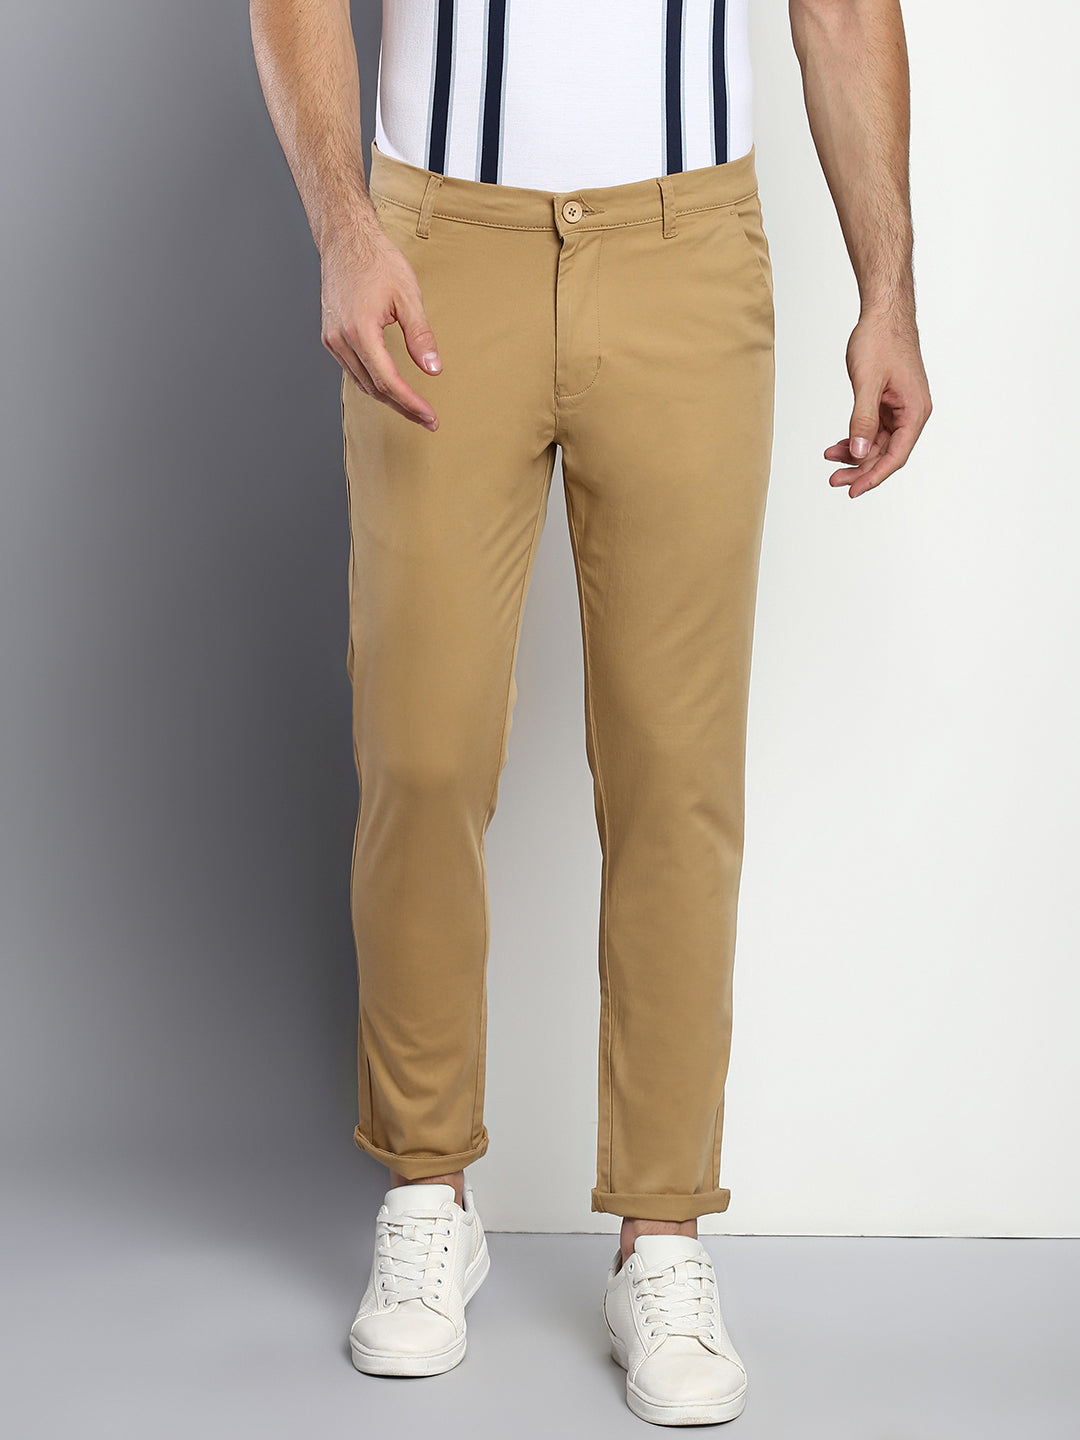 The Ford Pant at Current/Elliott